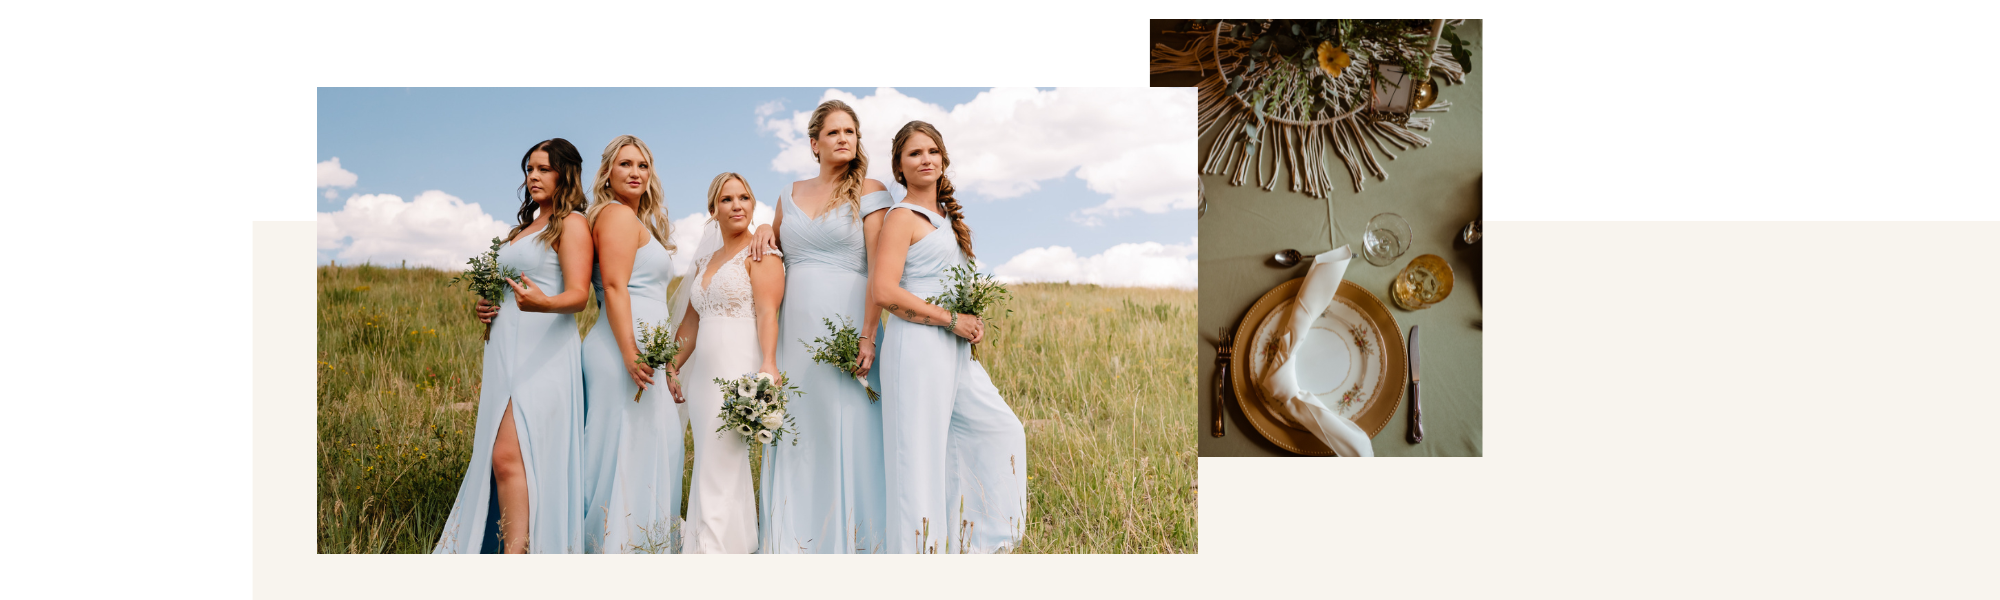 first look of bride and bridesmaids and upclose photo of wedding reception decor 